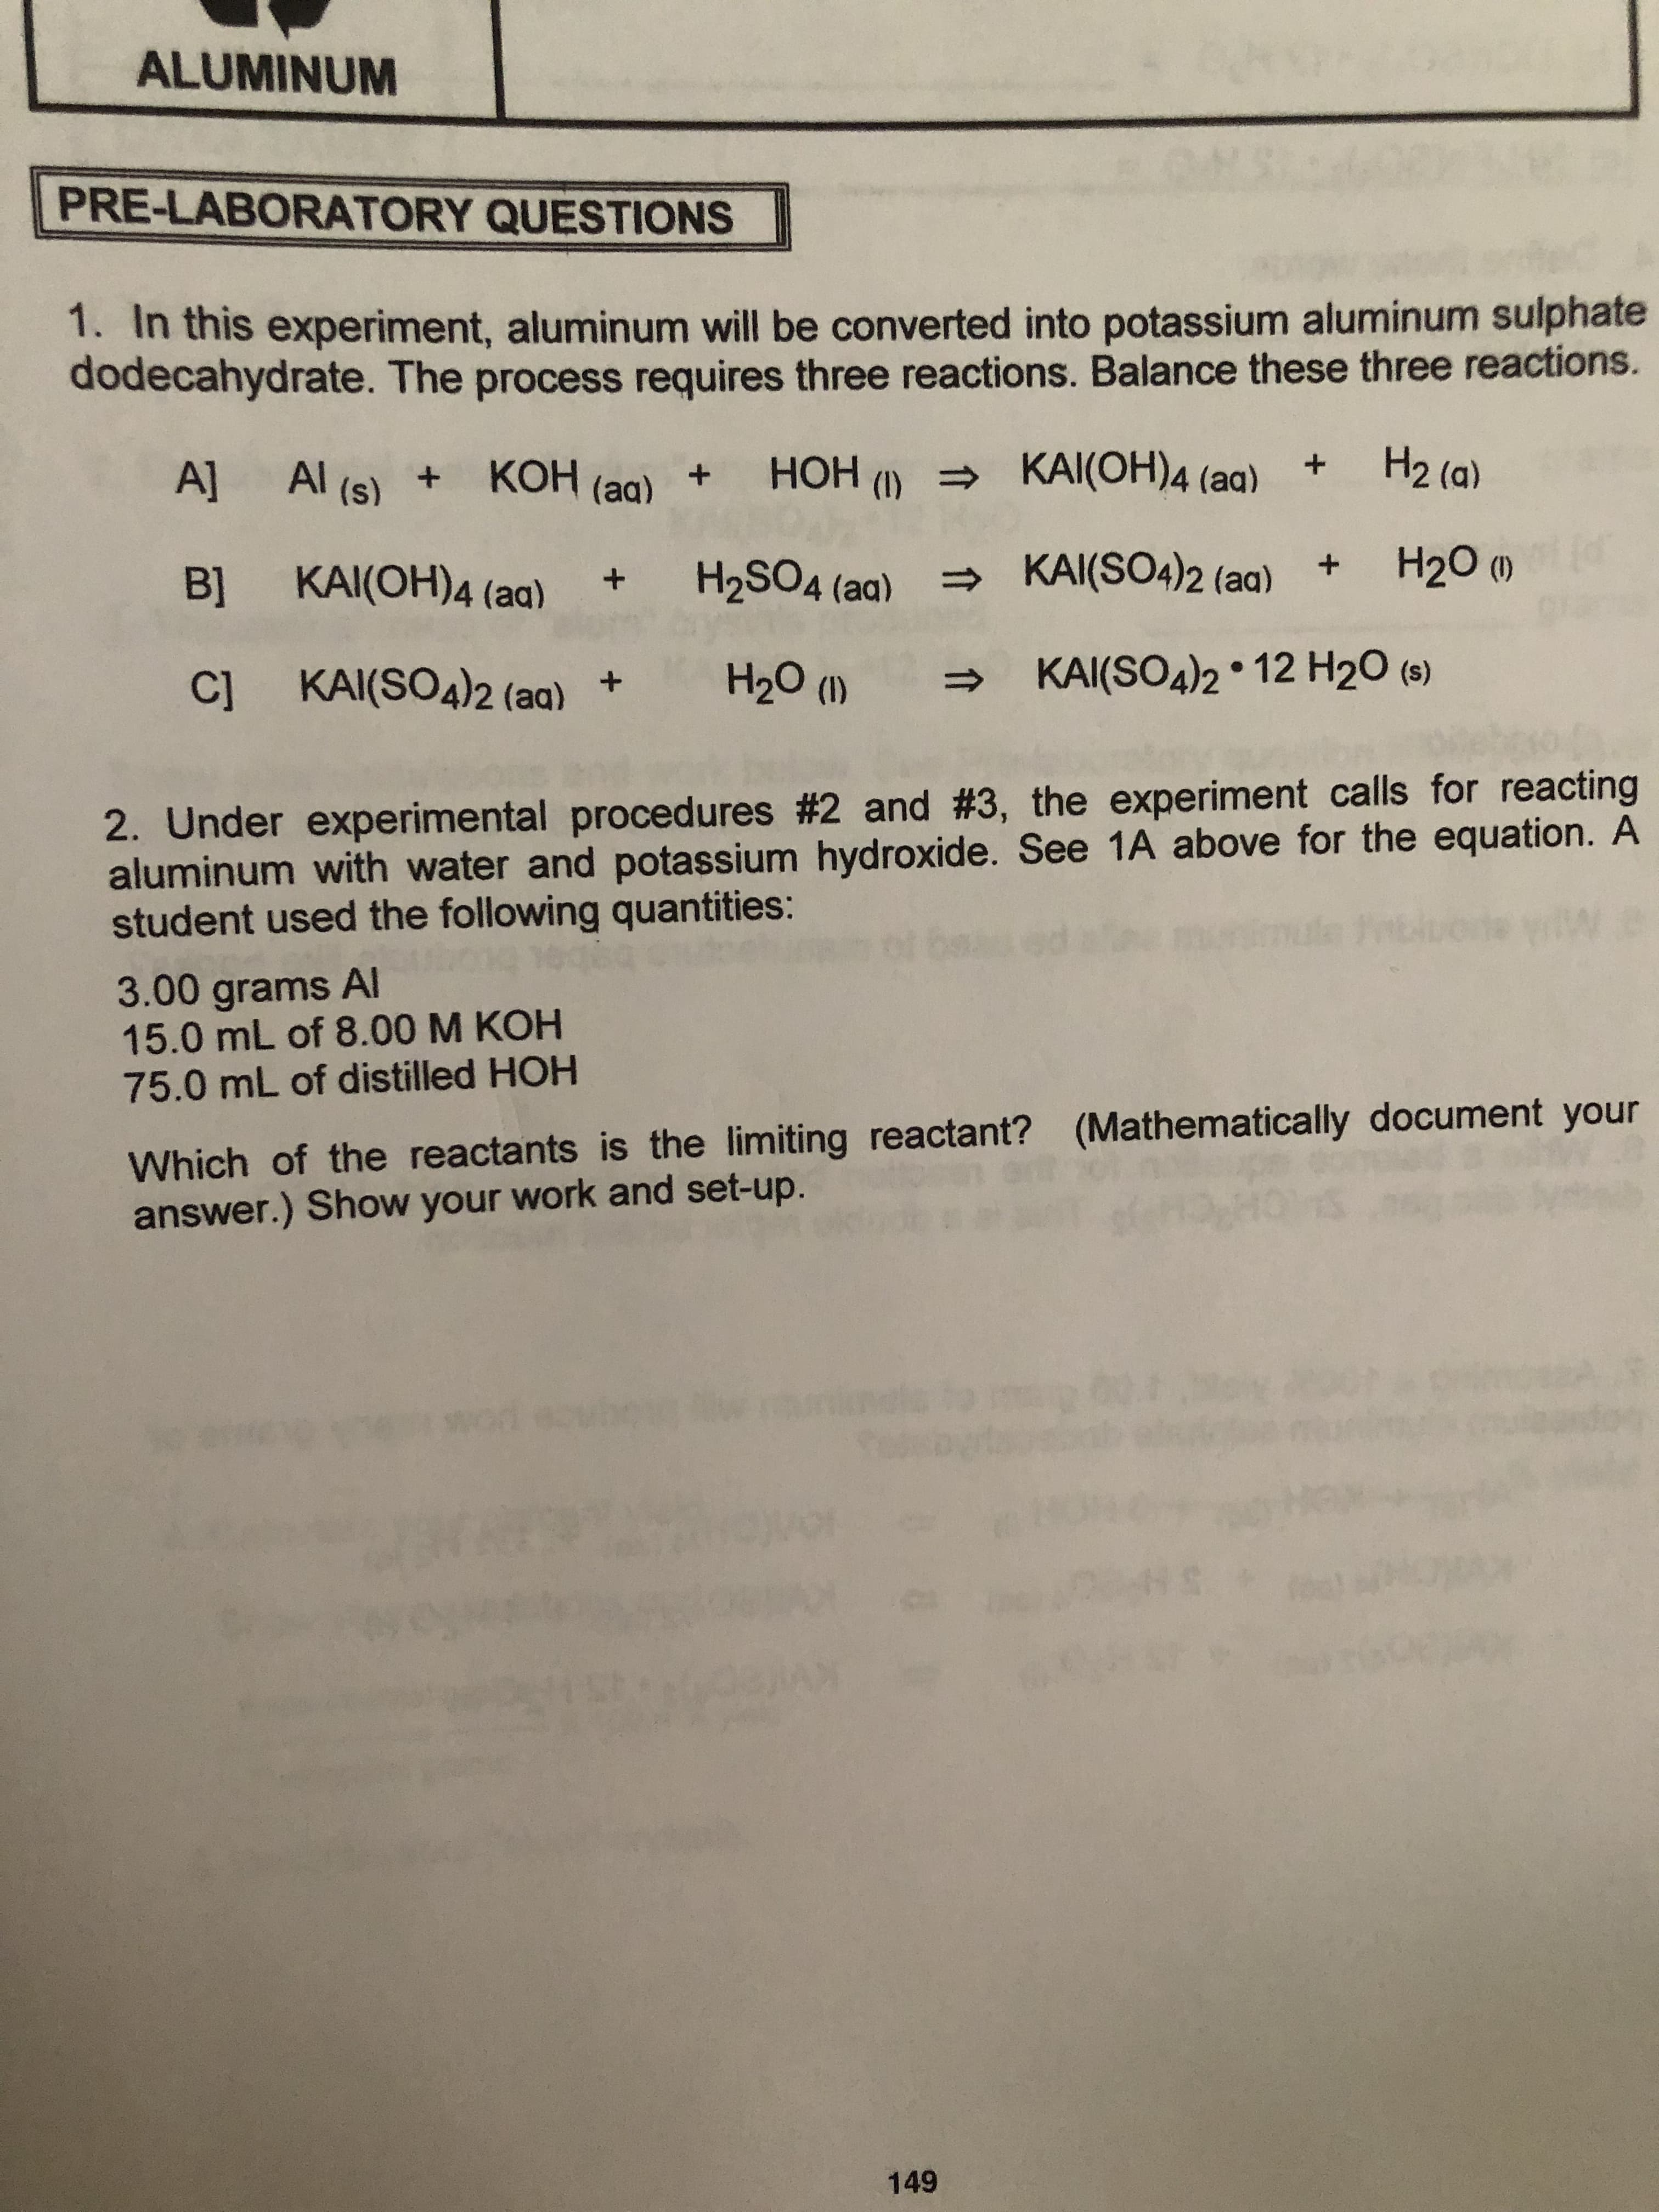 ALUMINUM
PRE-LABORATORY QUESTIONS
1. In this experiment, aluminum will be converted into potassium aluminum sulphate
dodecahydrate. The process requires three reactions. Balance these three reactions.
H2 (a)
KAI(OH)4 (aa)
A]
Al (s) KOH (aq) +HOH ()
(d
H20 ()
KAI(S04)2 (aq)
Bl KAI(OH)4 (aq)
H2SO4 (aa)
+
KAI(SO4)2 12 H20 (s)
H20 ()
C] KAI(SO4)2 (aq) +
2. Under experimental procedures #2 and #3, the experiment calls for reacting
aluminum with water and potassium hydroxide. See 1A above for the equation. A
student used the following quantities:
W
3.00 grams AI
15.0 mL of 8.00 M KOH
75.0 mL of distilled HOH
Which of the reactants is the limiting reactant? (Mathematically document your
answer.) Show your work and set-up.
.S
149
